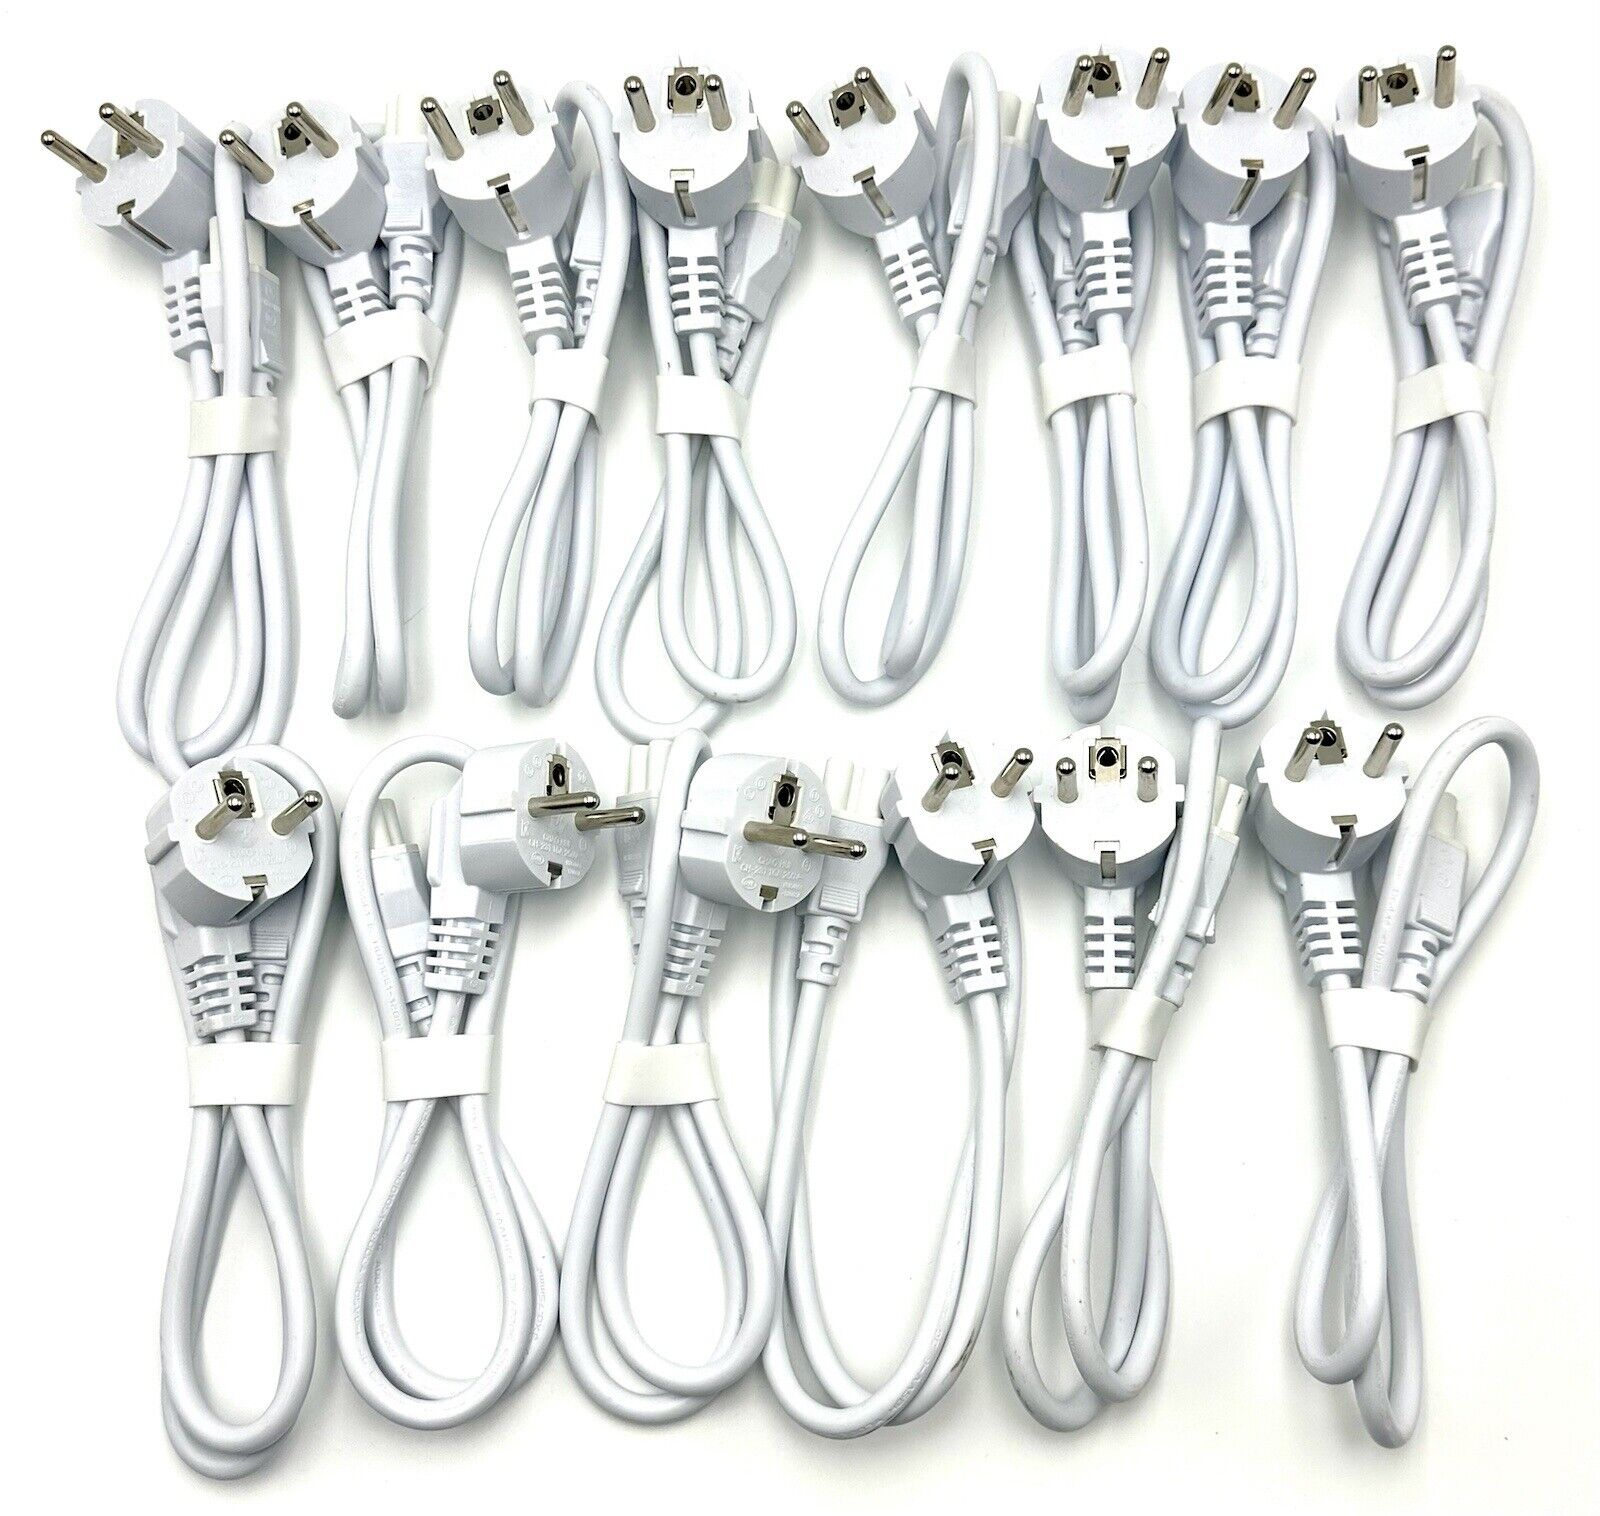 3 Prong EU EURO European AC Power Cable Cord Mickey Mouse Style  - Lot of 14